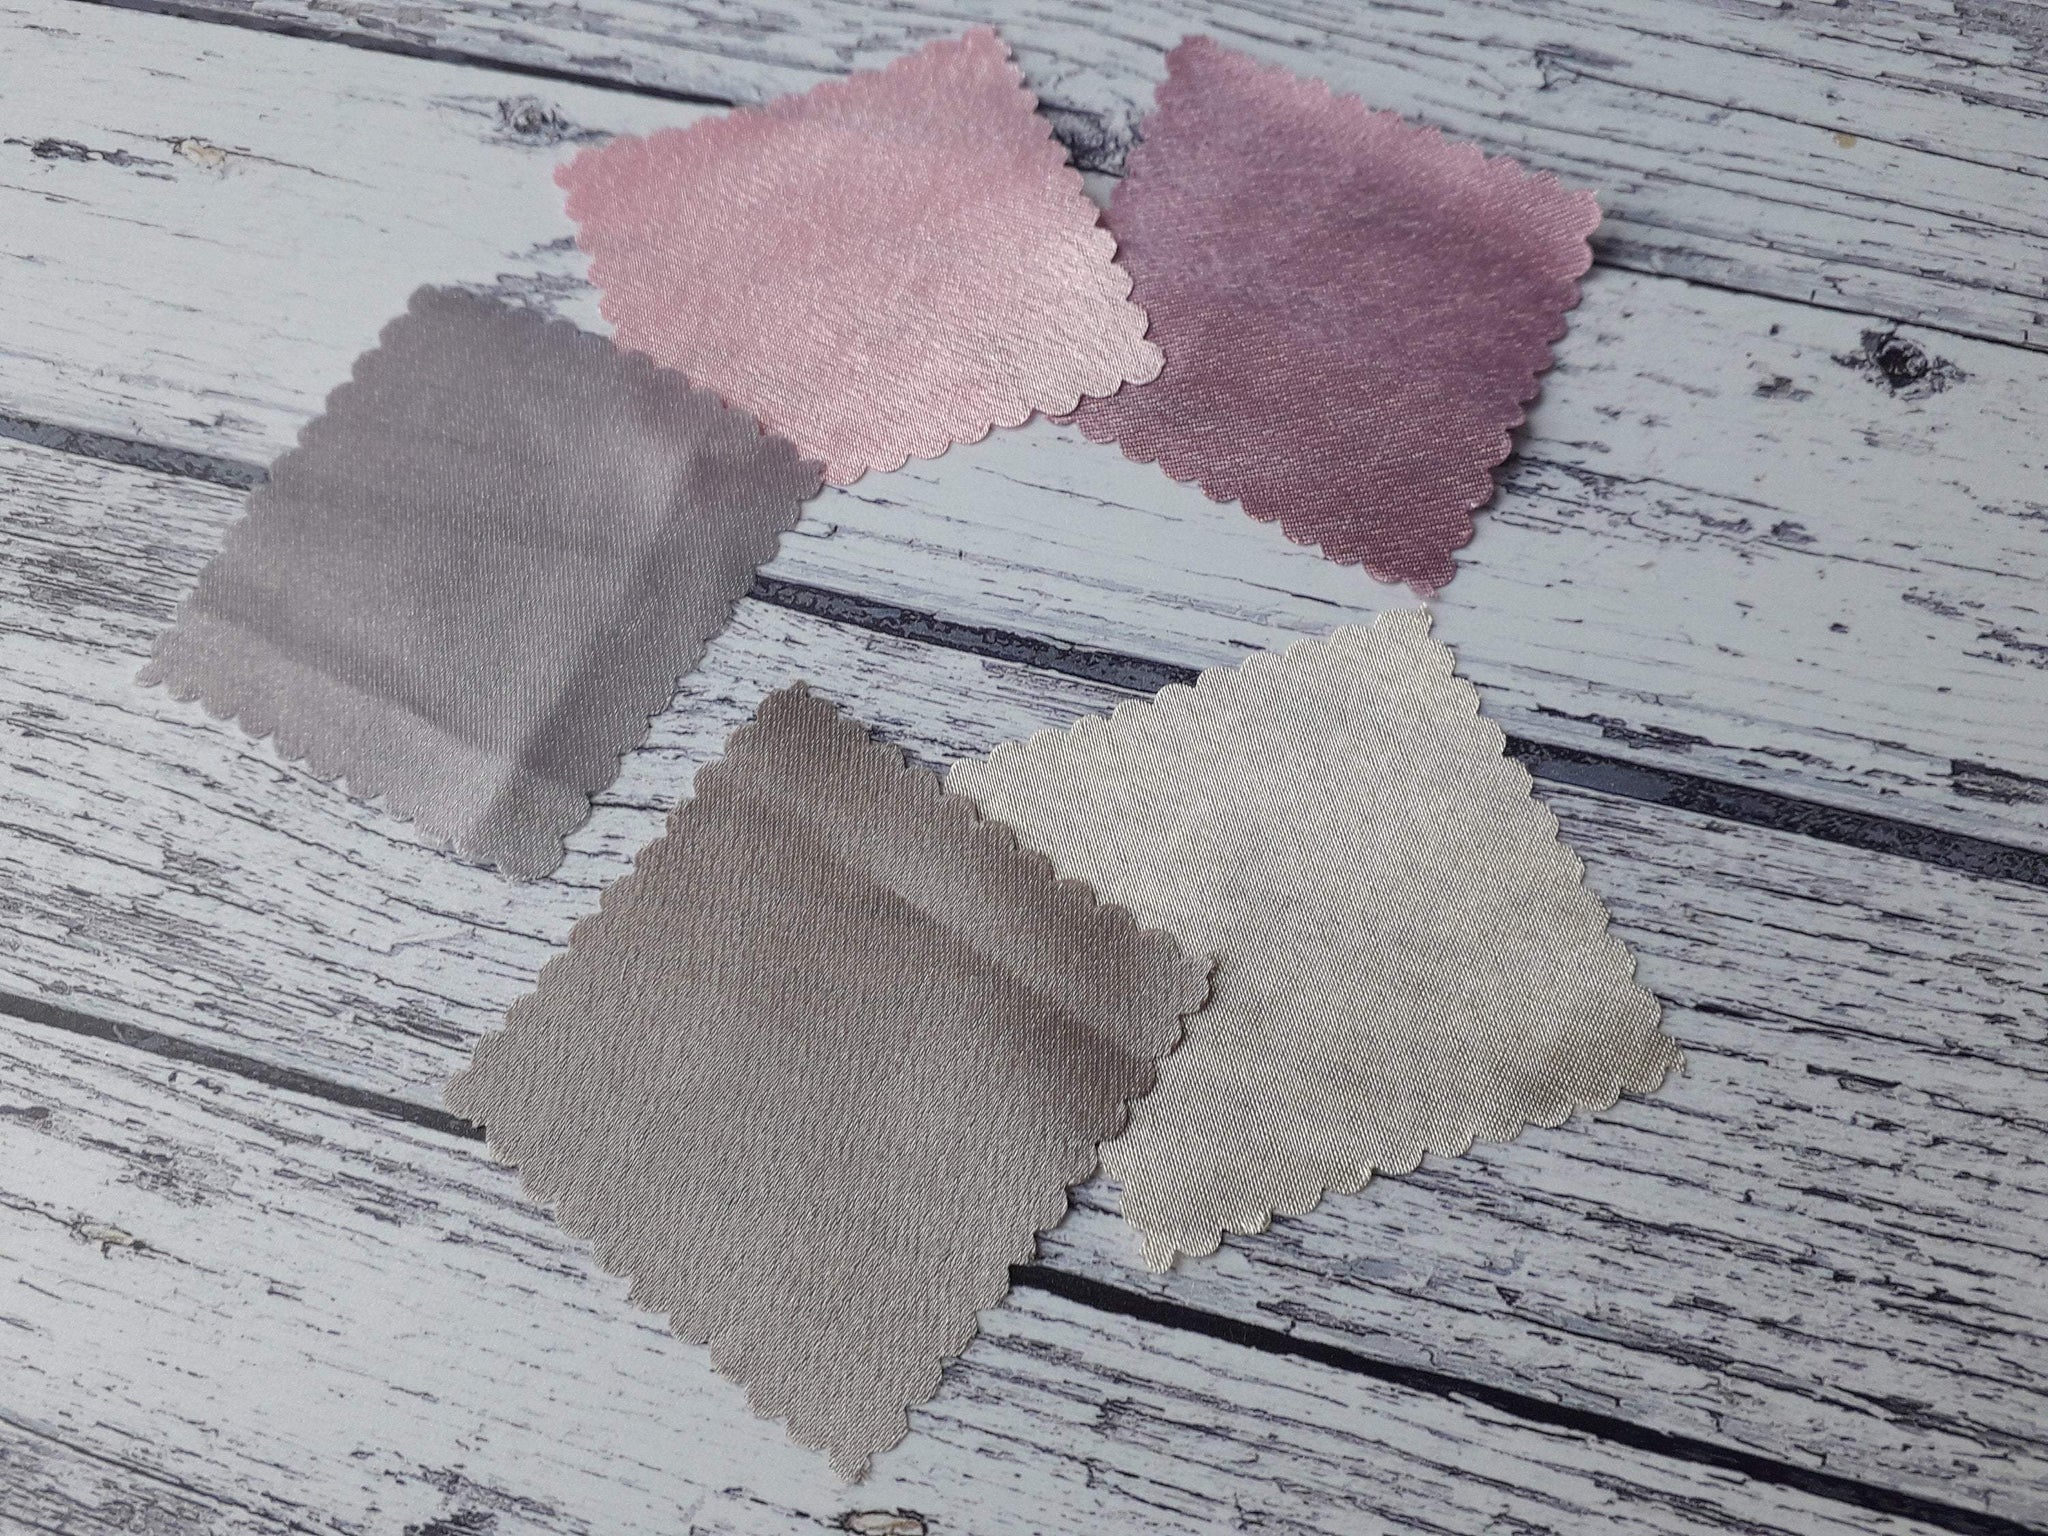 Sample Satin and Velvet Fabric Swatches for Clutch Bags and Purses for Colour Matching